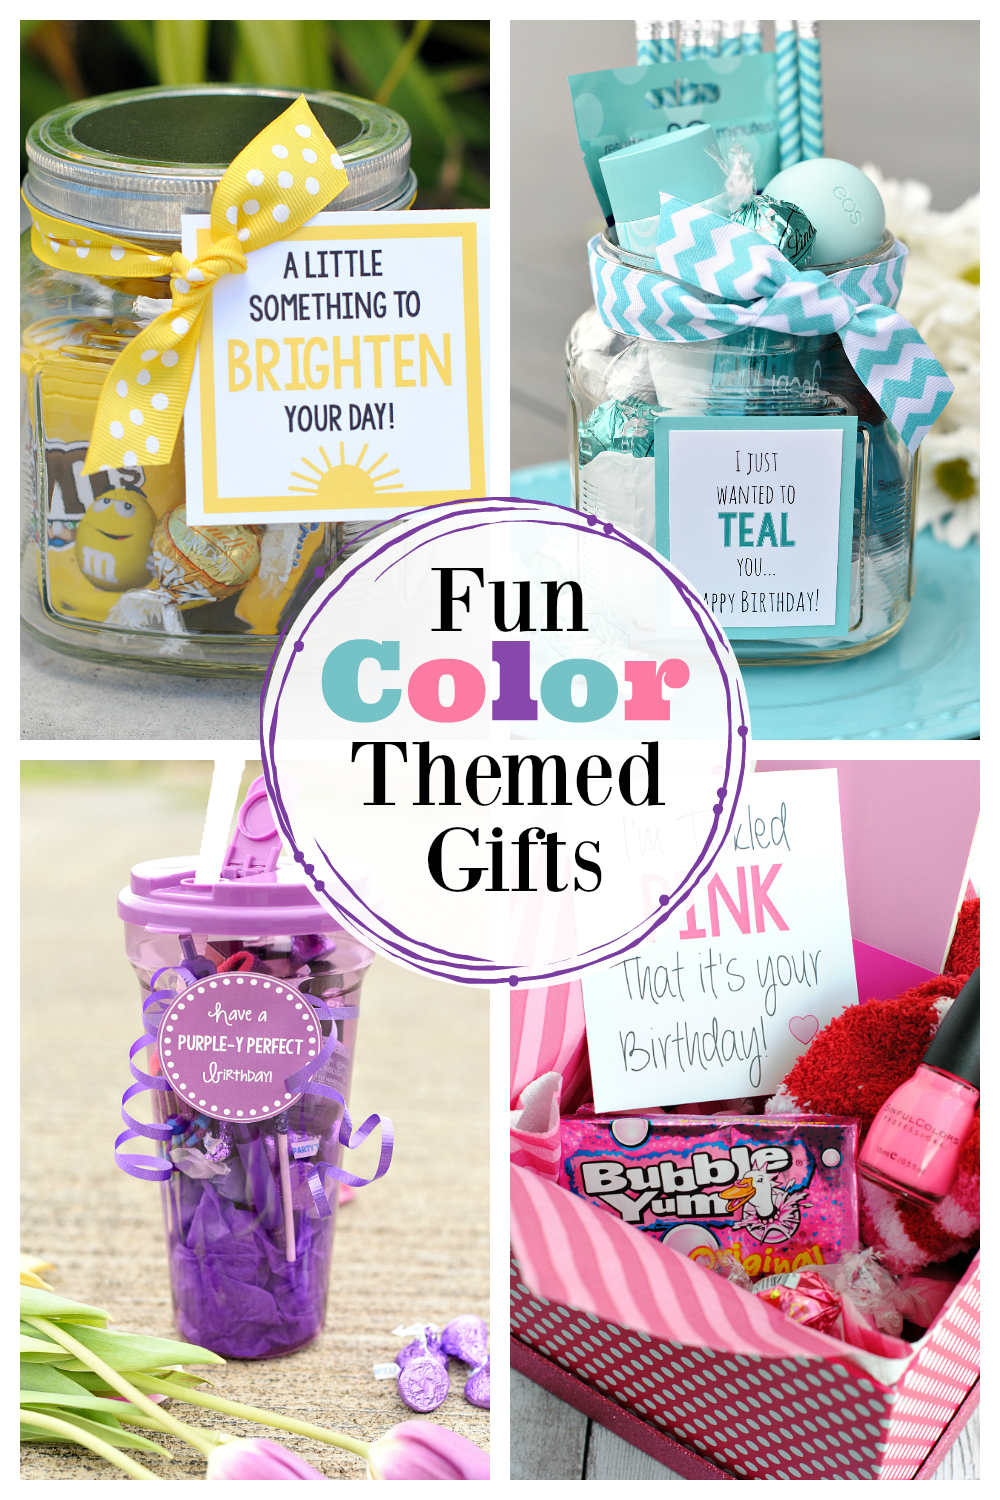 Have fun giving color themed gifts! We have so many fun gift ideas for you, all inspired by a different color. So many simple gift ideas, it's hard to know where to start. #gifts #colorgiftideas #fungifts #fungiftideas #birthdaygifts